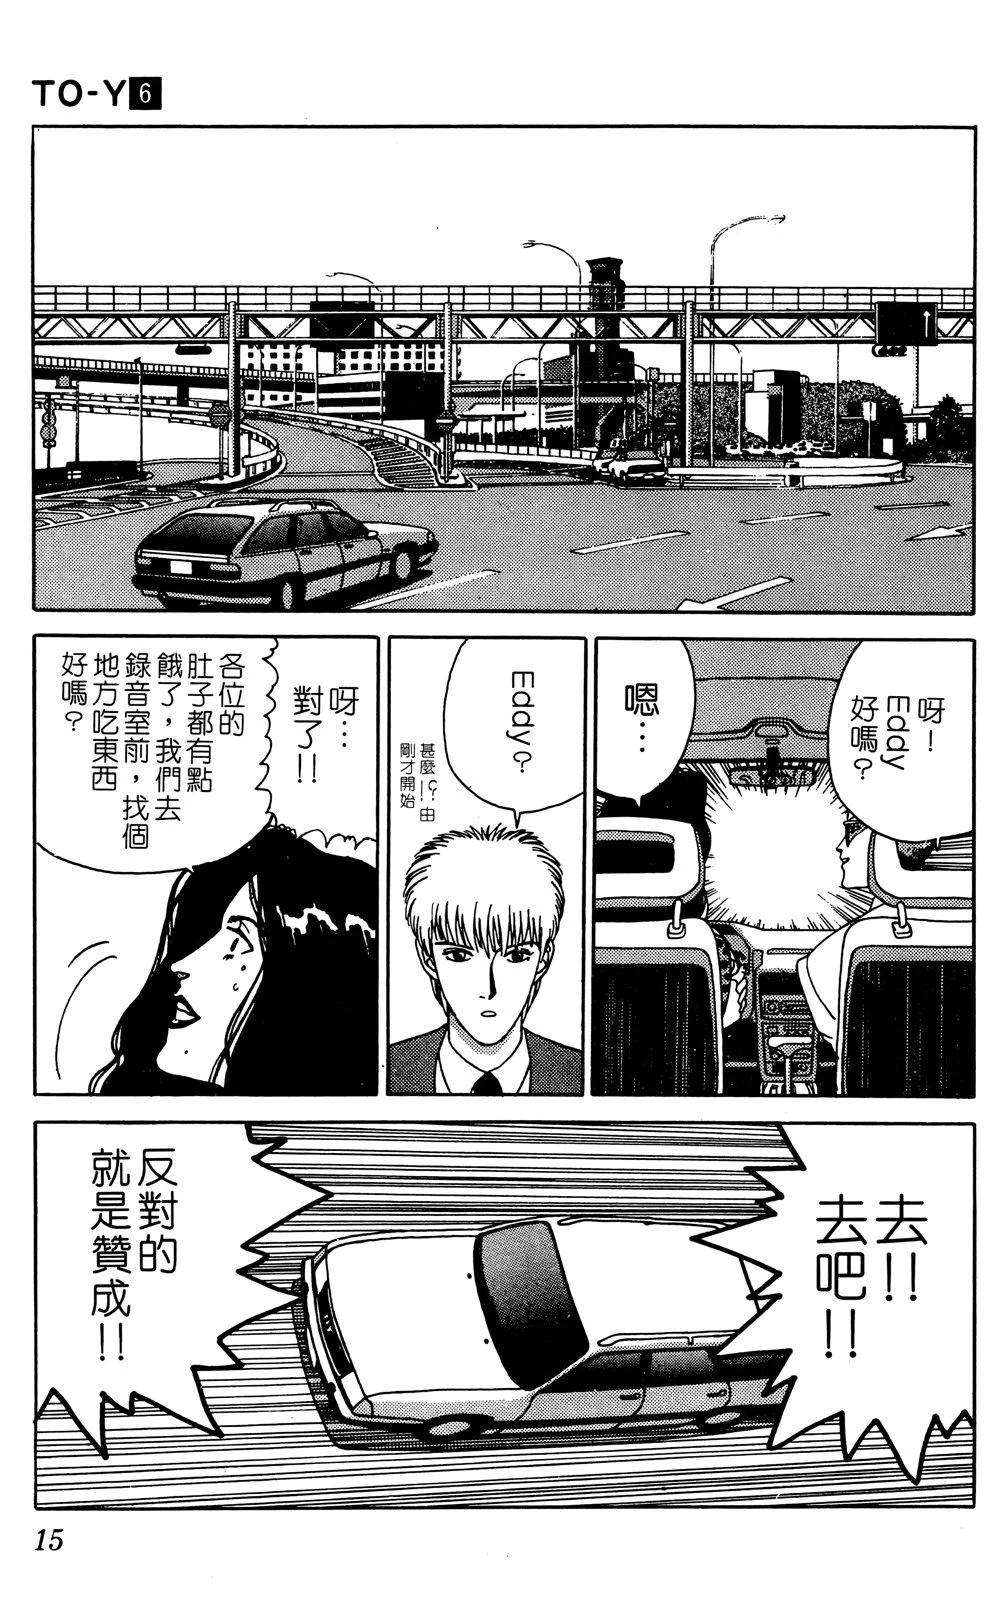 TO-Y - 第06卷(1/4) - 2